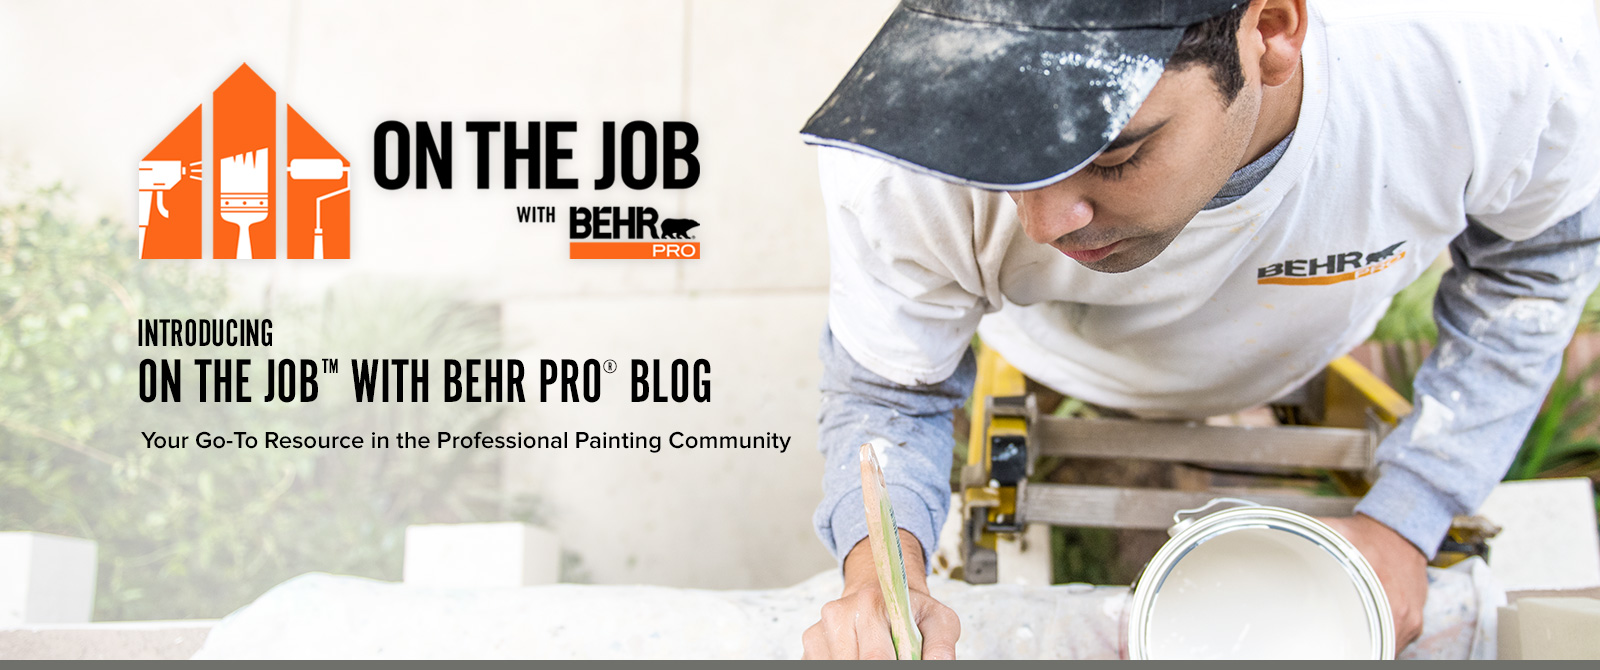 Introducing On the Job with BEHR PRO Blog - An insightful Blog for Professional Painting Community